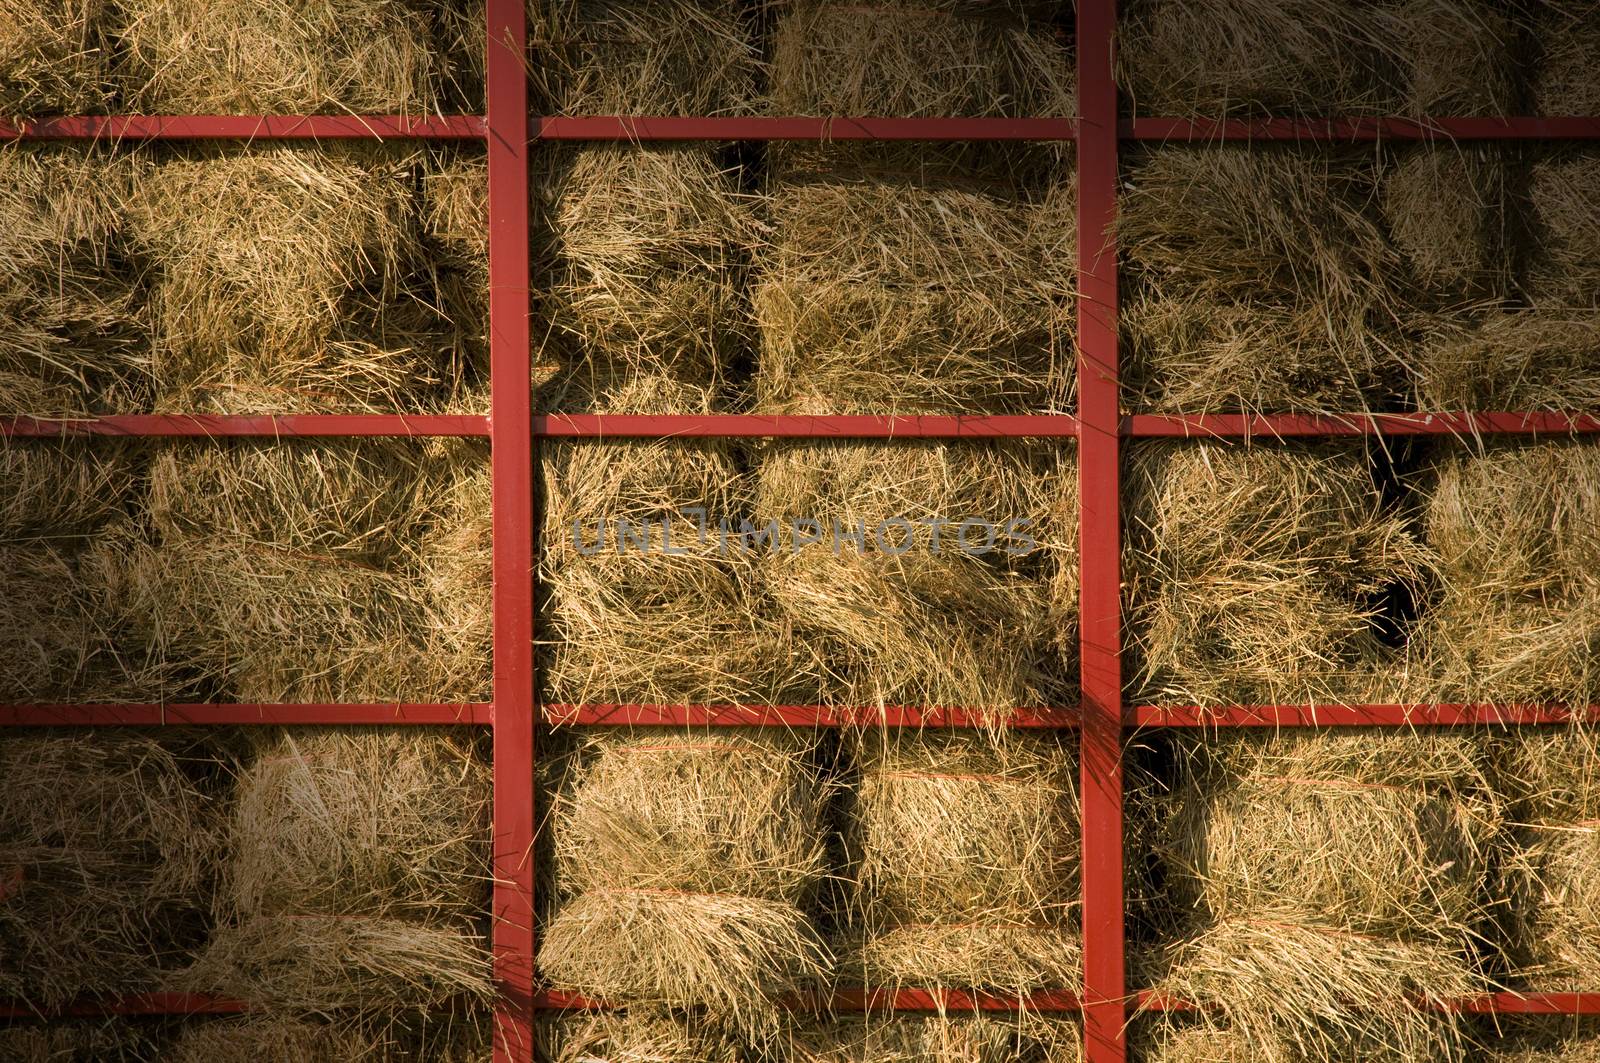 Hay bales piled within a cart lit diagonally by Balefire9